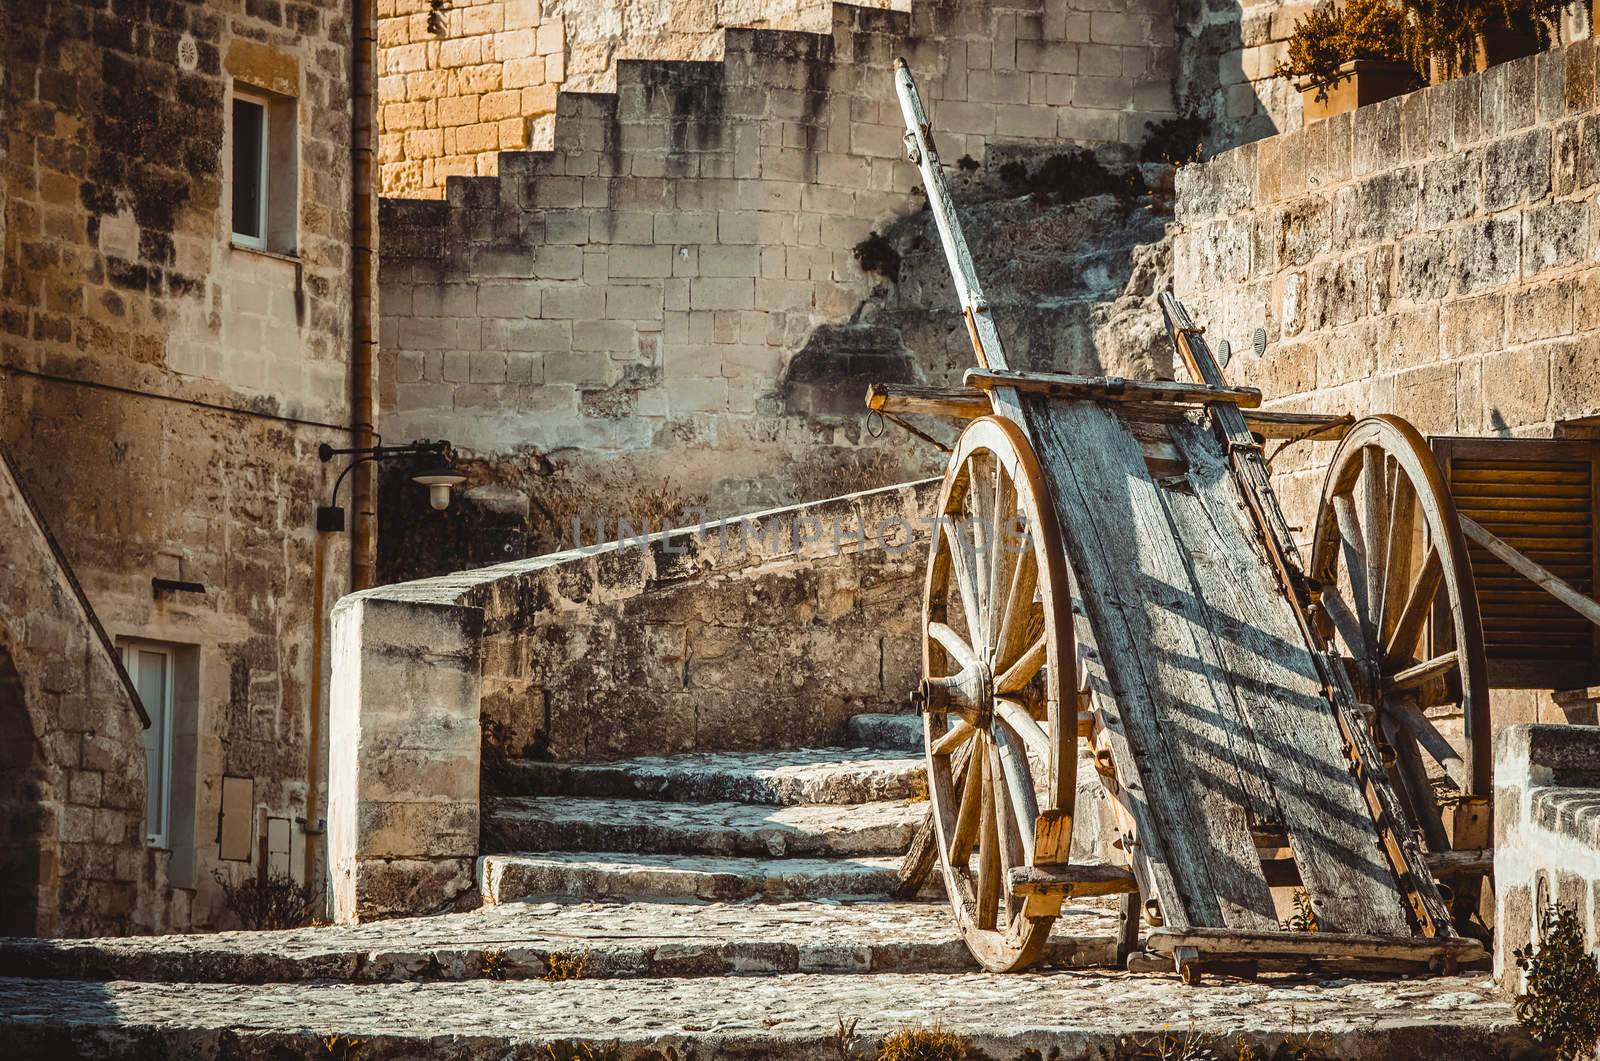 old historical wood wagon typical tool used in the past, in Matera, Italy UNESCO European Capital of Culture 2019